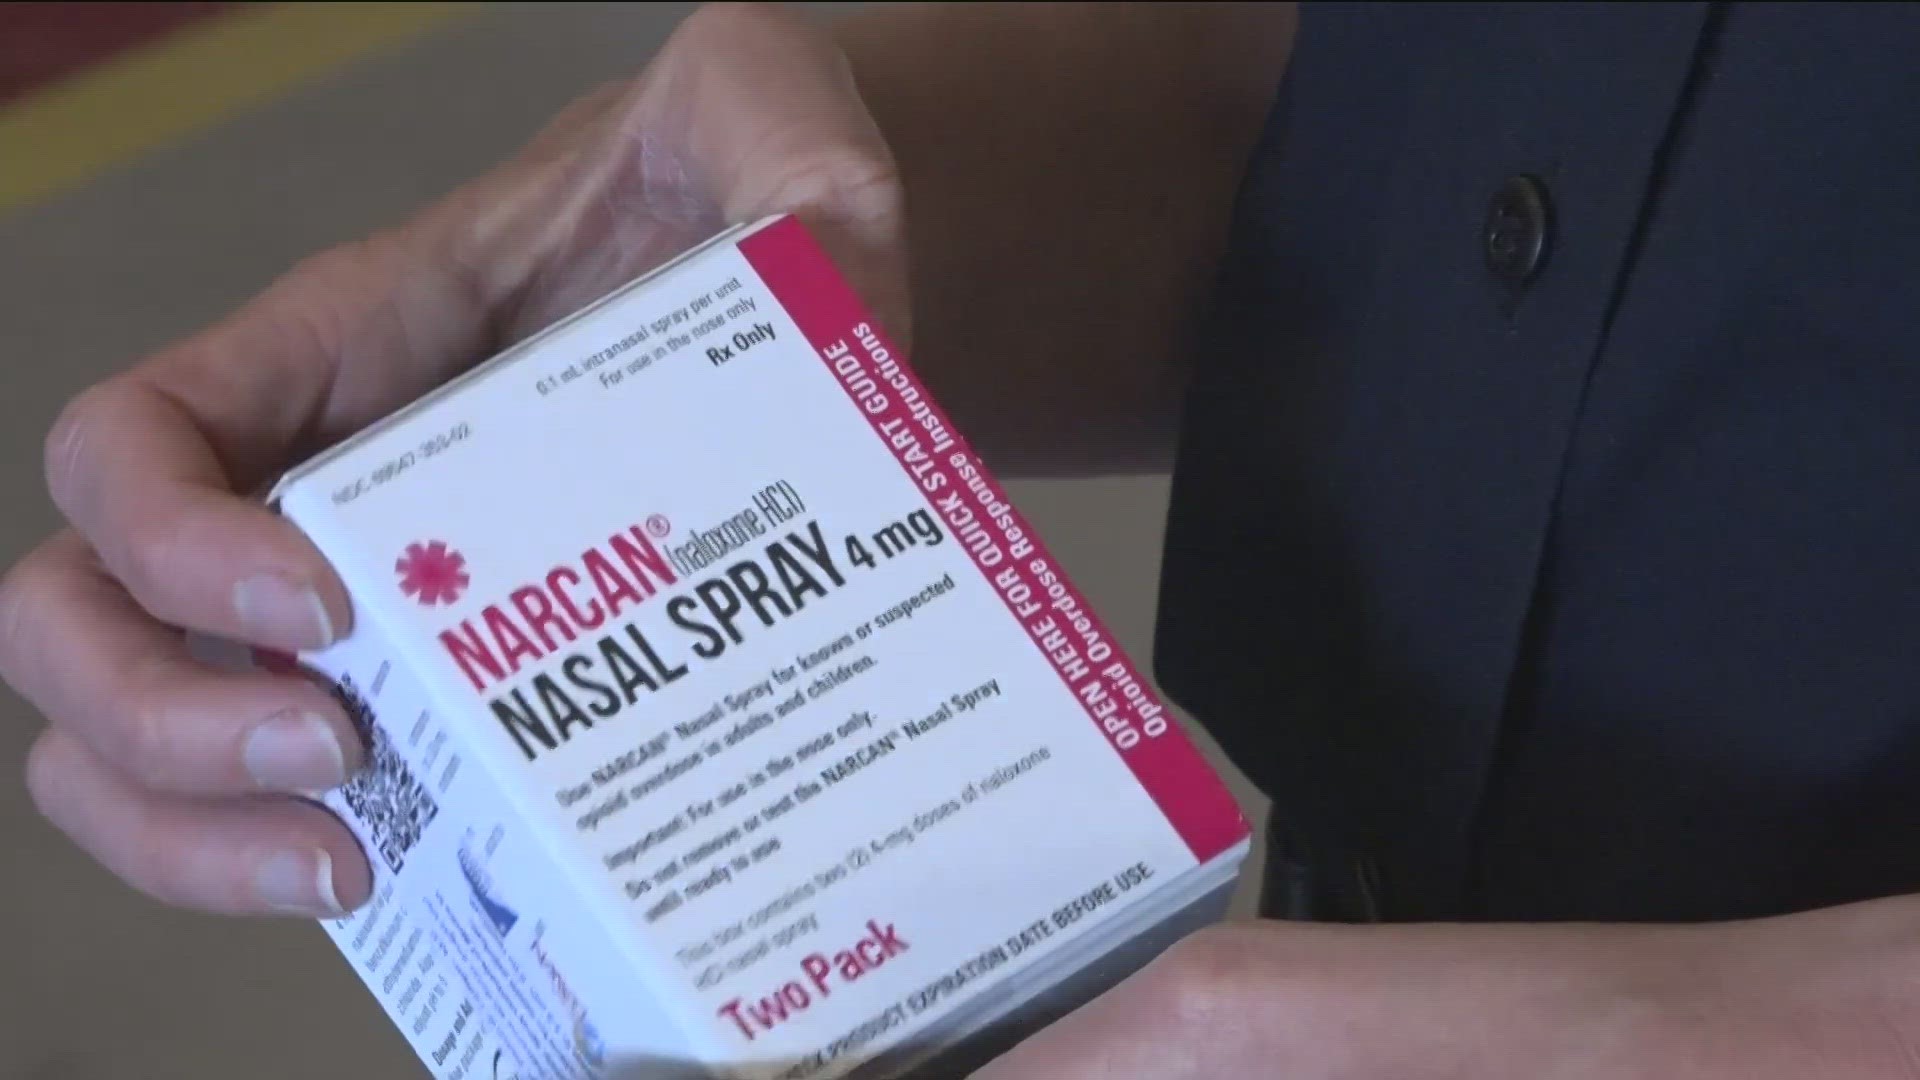 "For this year alone for Lake Township, we have given Narcan 15 times," a Lake Township firefighter said.